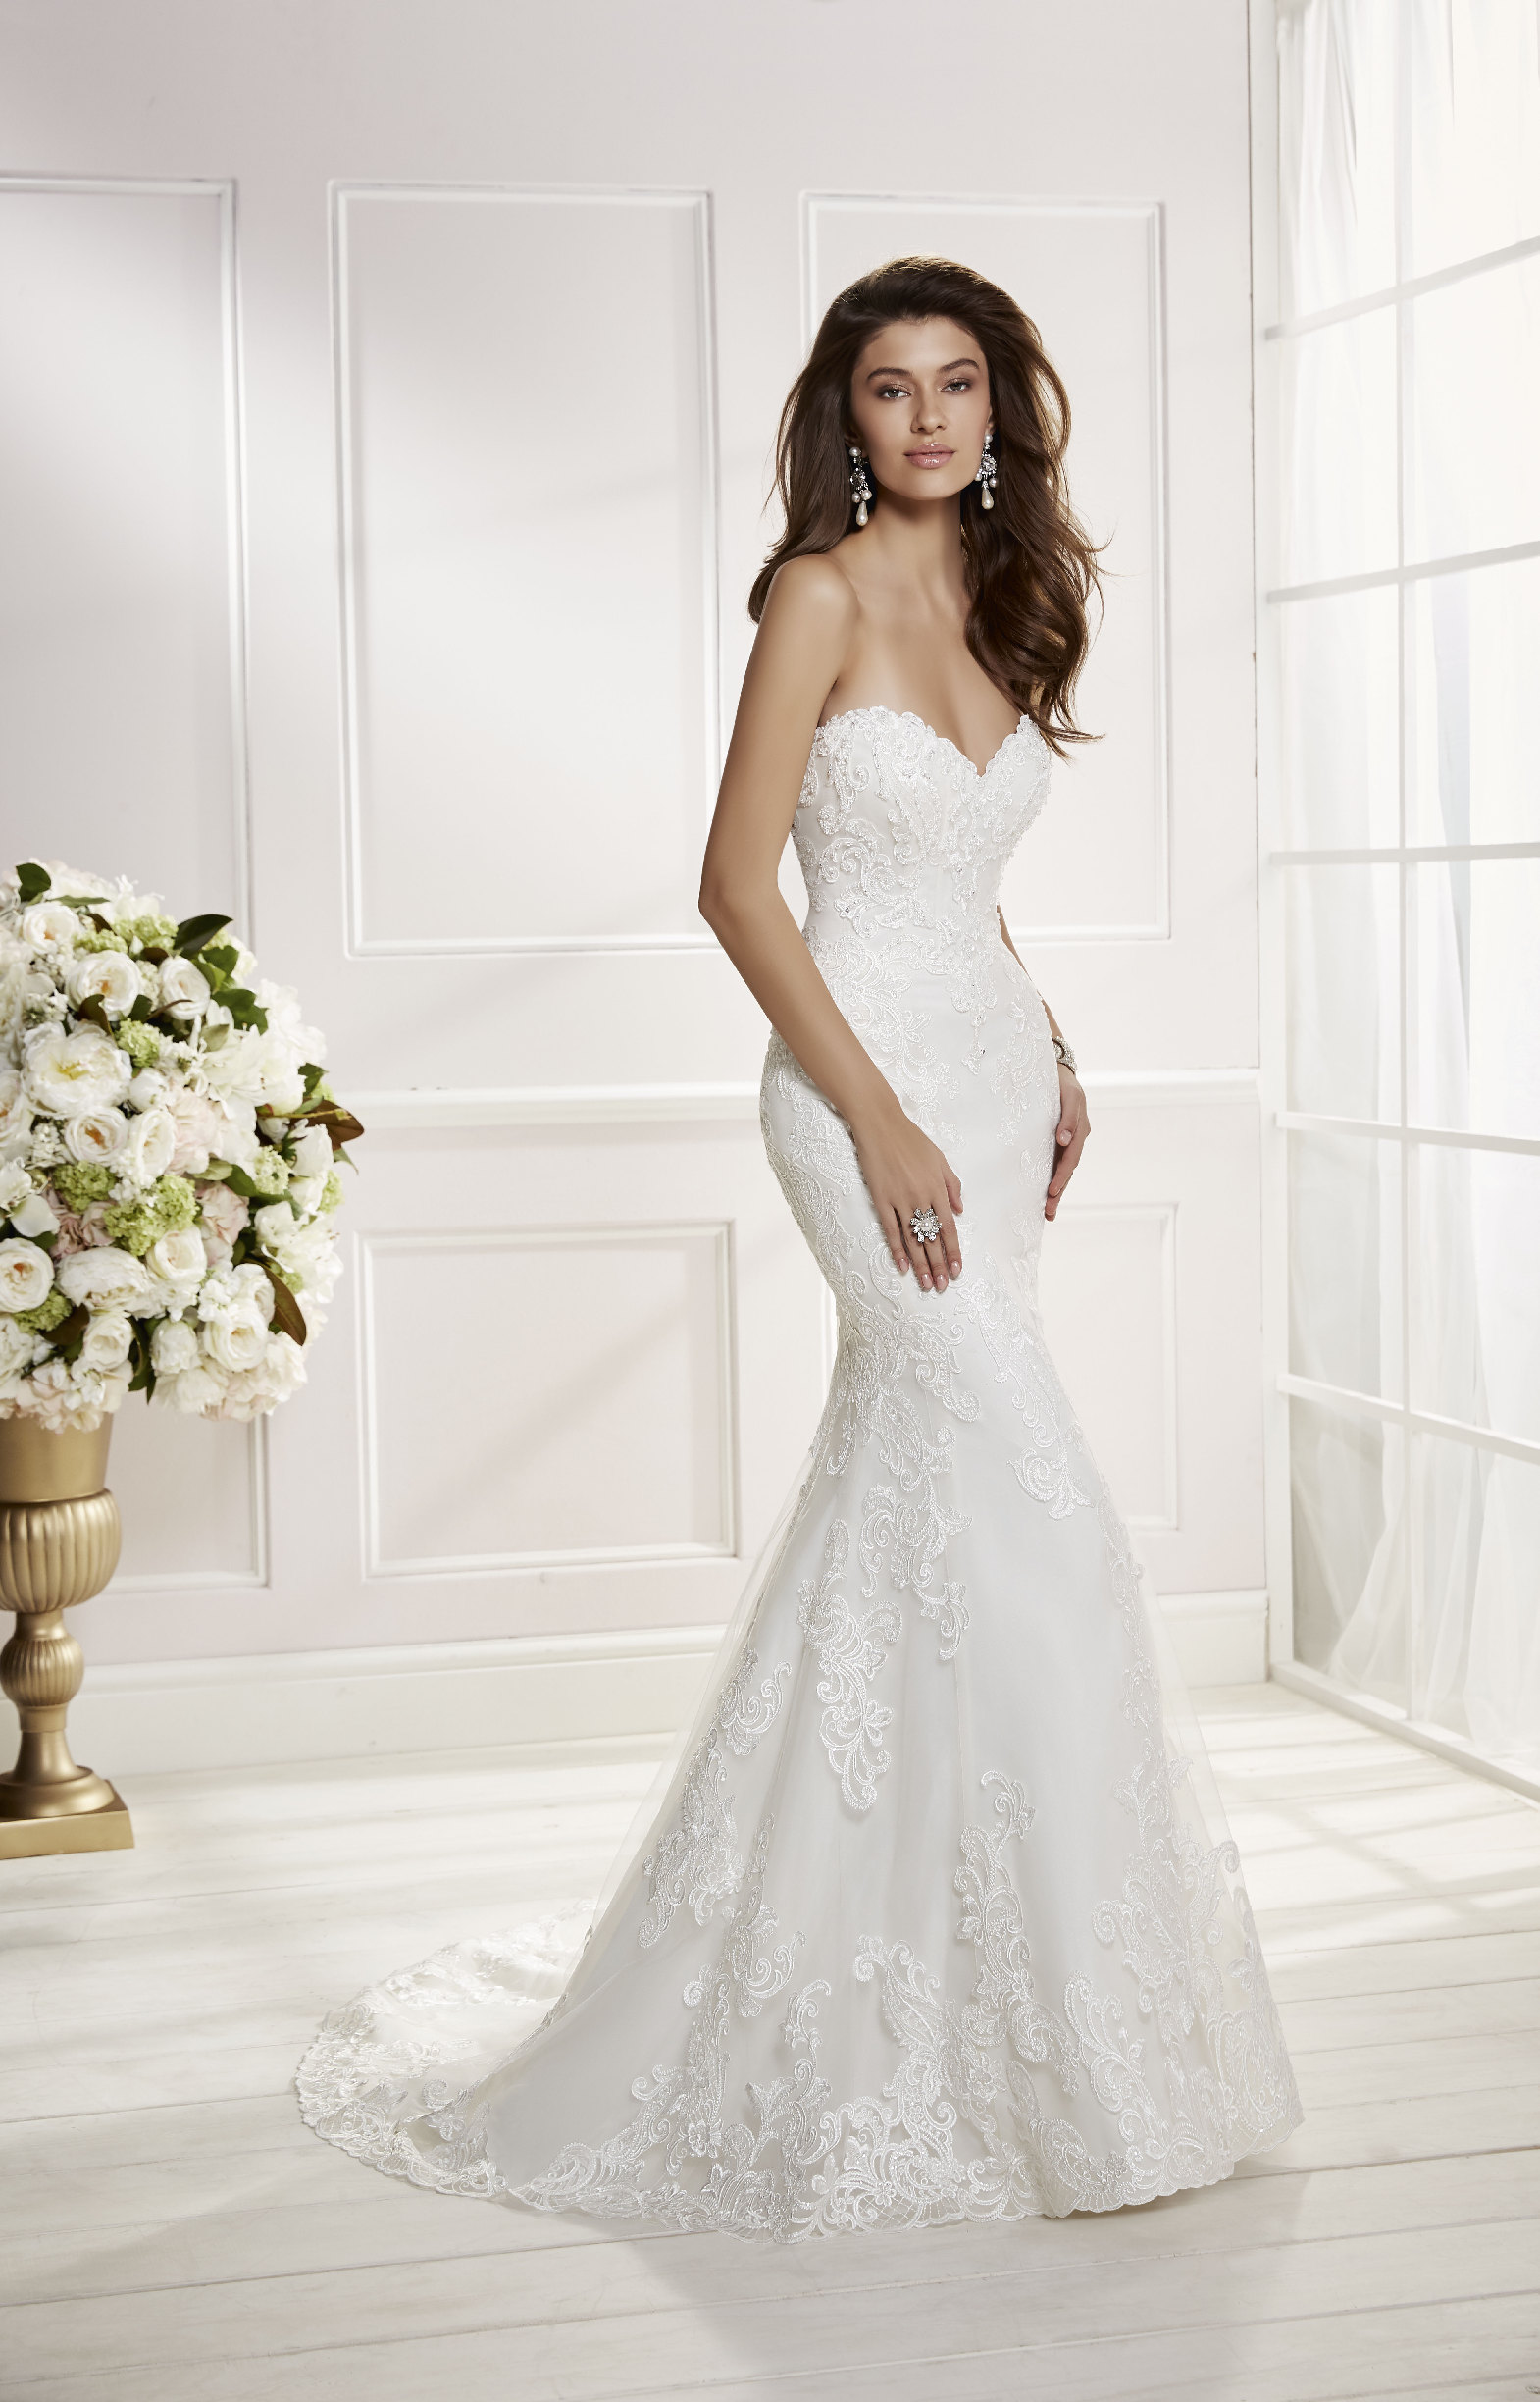 Model wearing Ronald Joyce wedding dress style Carina, 69455, a strapless on-trend lace fit and flare wedding dress with a sweetheart neckline 